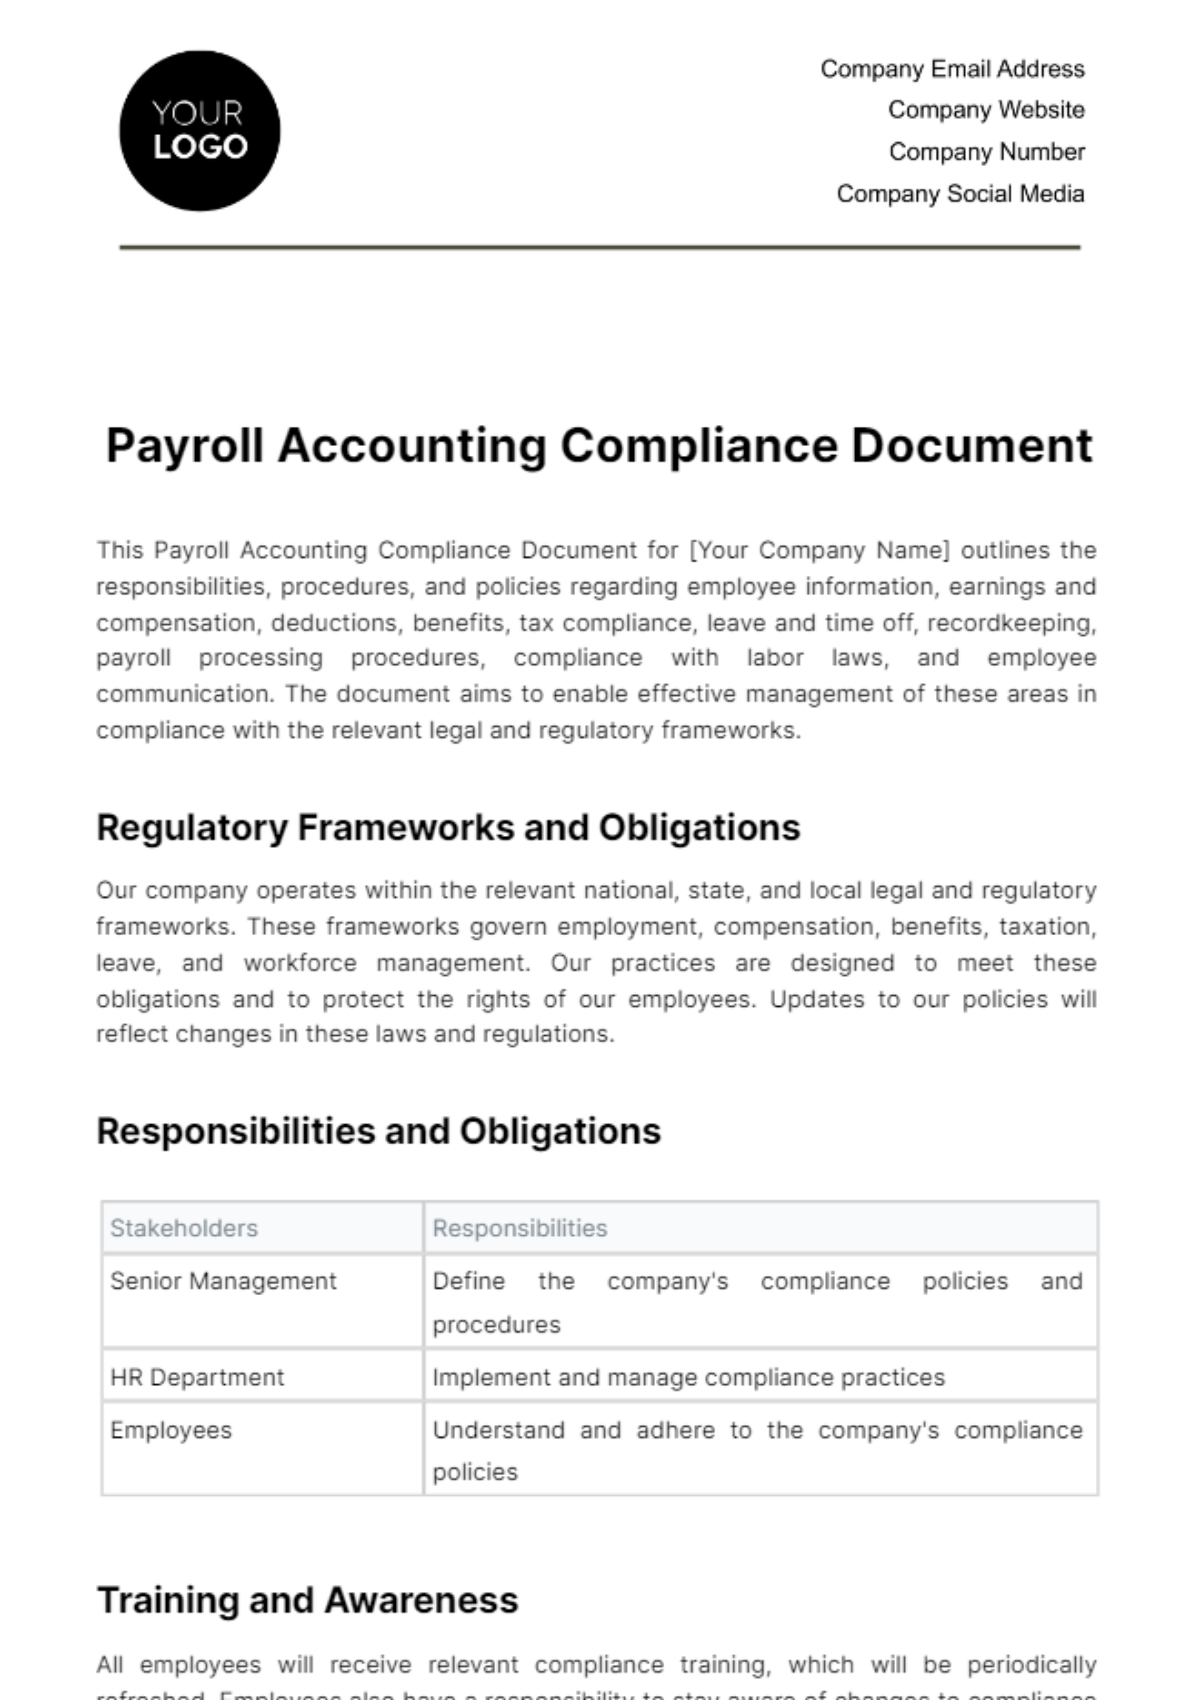 Free Payroll Accounting Compliance Document Template